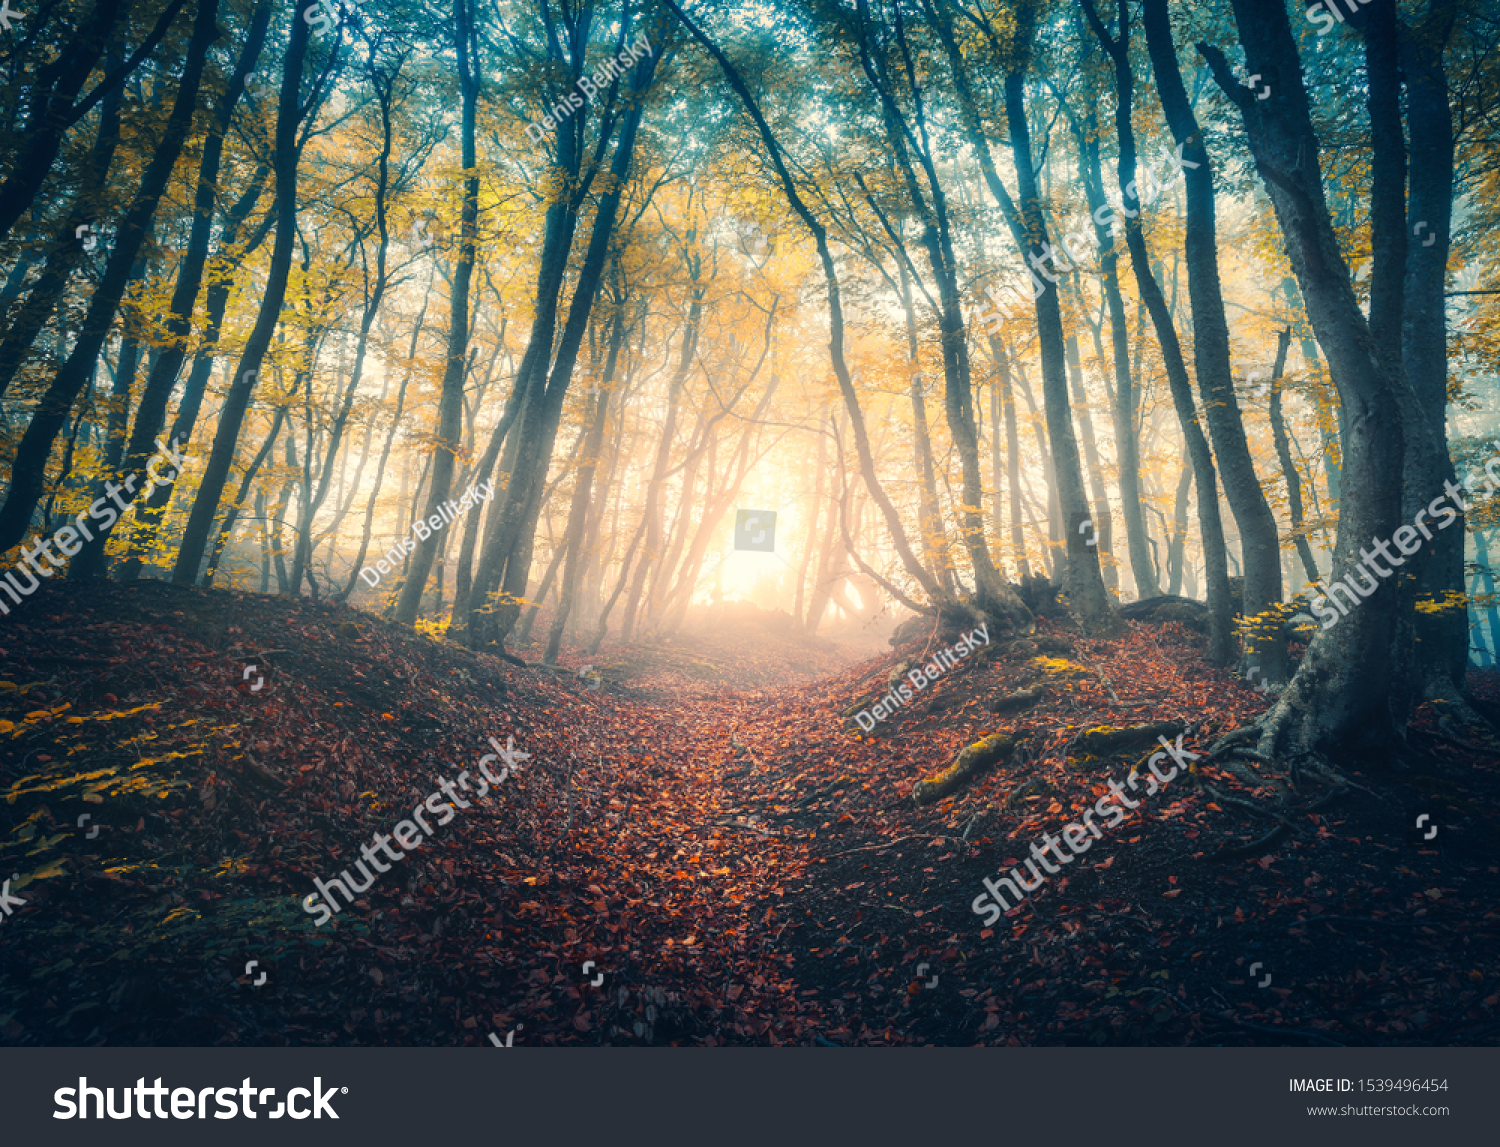 Path in beautiful forest in fog at sunrise in autumn. Colorful landscape with enchanted trees with orange and red leaves. Scenery with trail in dreamy foggy forest. Fall colors in october. Nature #1539496454